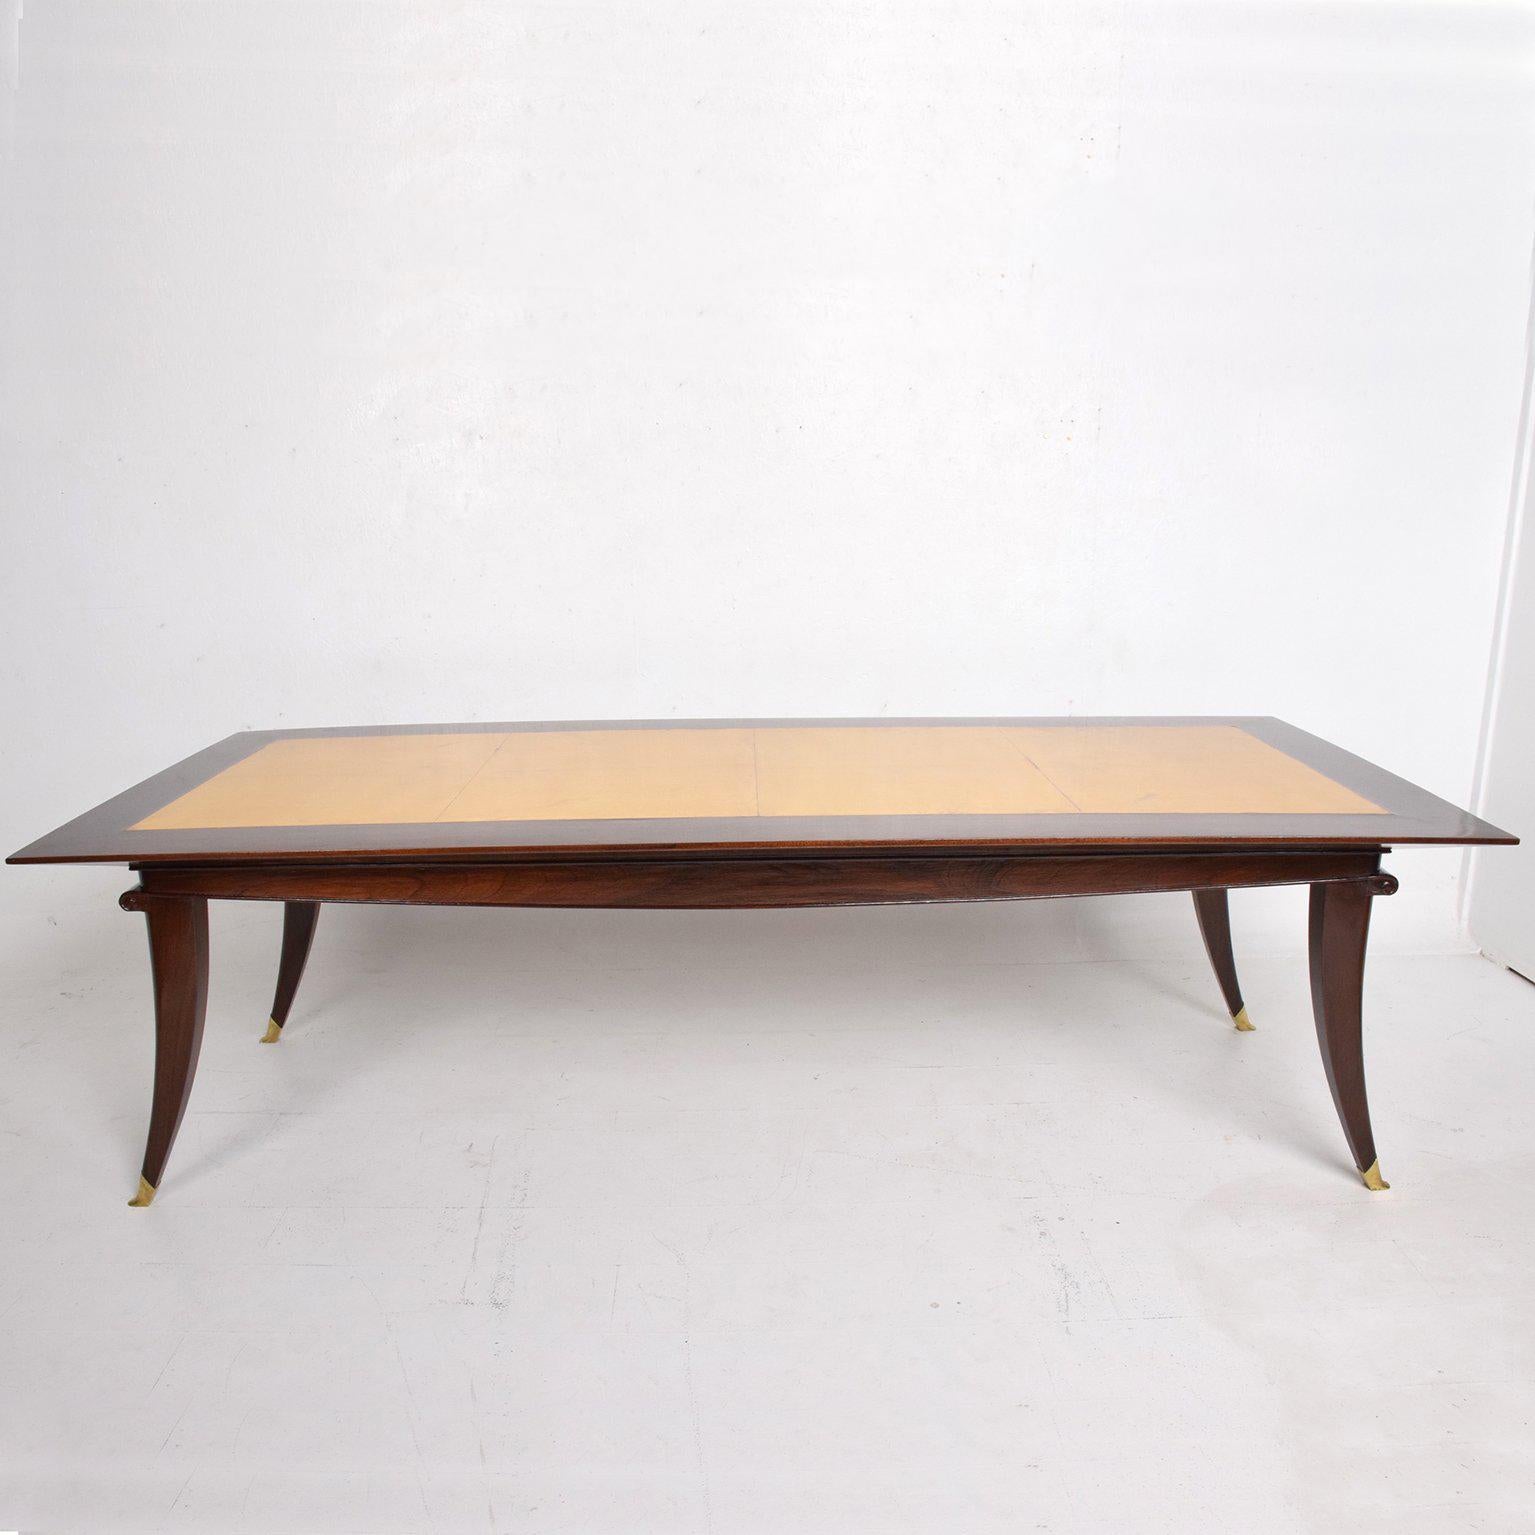 For your consideration a beautiful dining table in solid Mahogany wood with goatskin top and sculptural solid brass sabots.

Sculptural shape with tapered legs.
It can fit eight chairs.

Unmarked, no label or signature from the maker present.